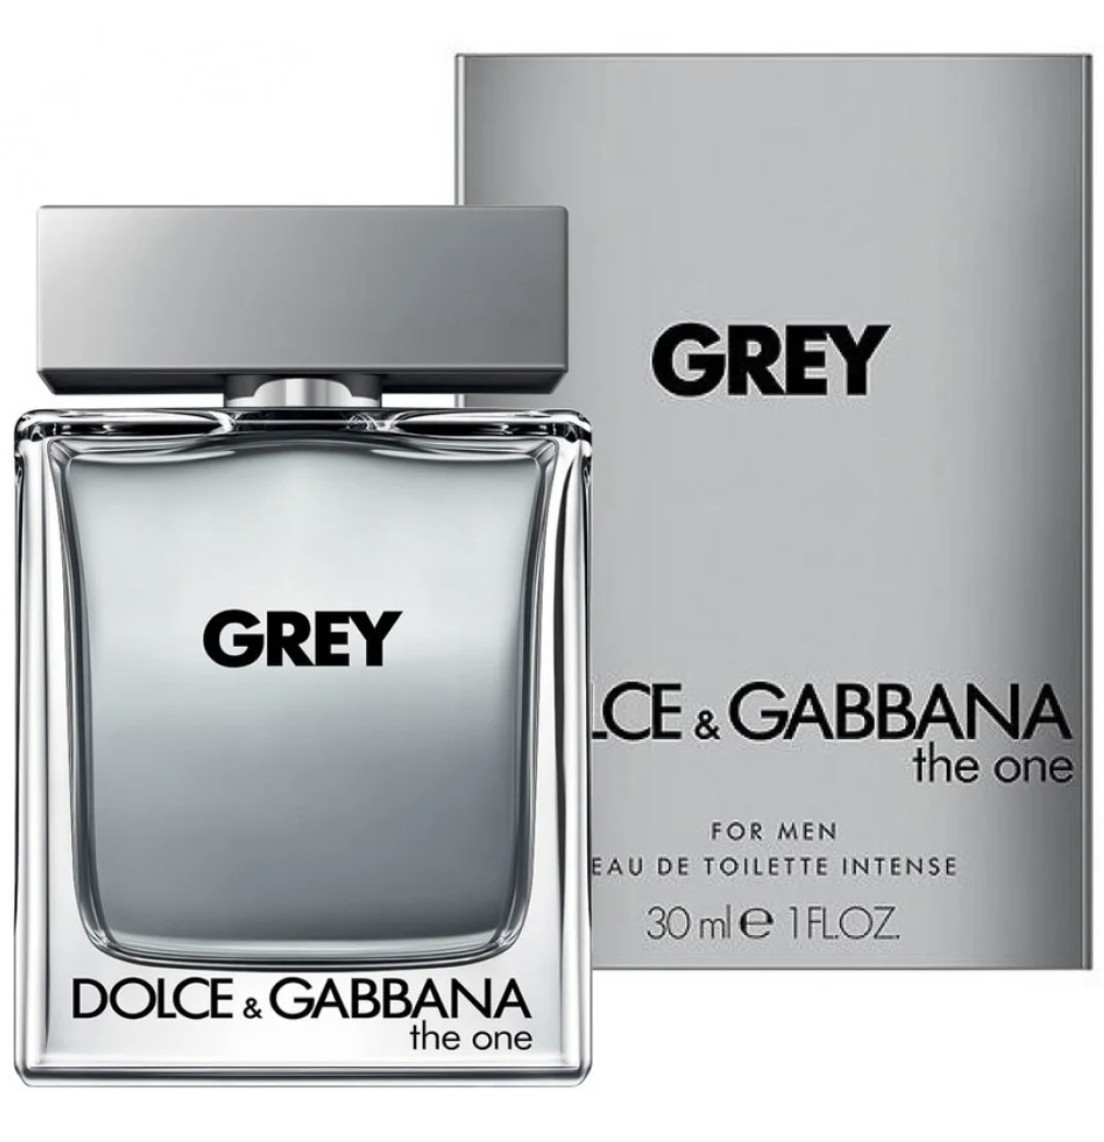 dolce and gabbana the one grey release date